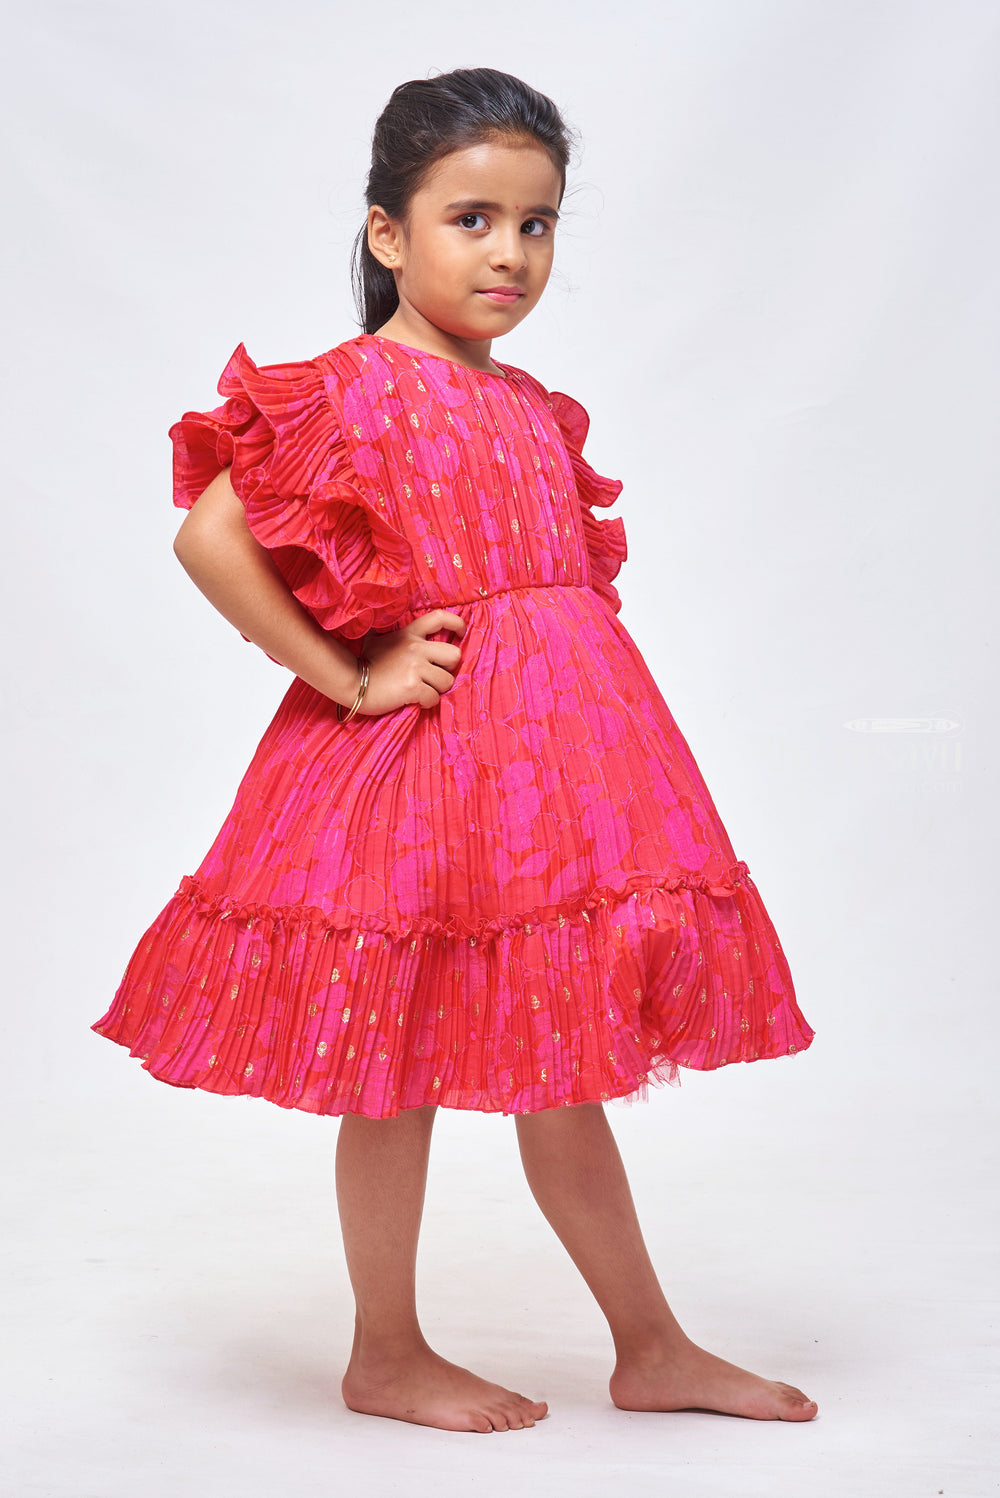 The Nesavu Girls Fancy Party Frock Red Radiance: Girls' Floral Foil-Printed Pleated Party Frock with Flare Nesavu Adorable Baby Birthday Frock Designs | Little Girls' Fancy Party Dresses | The Nesavu